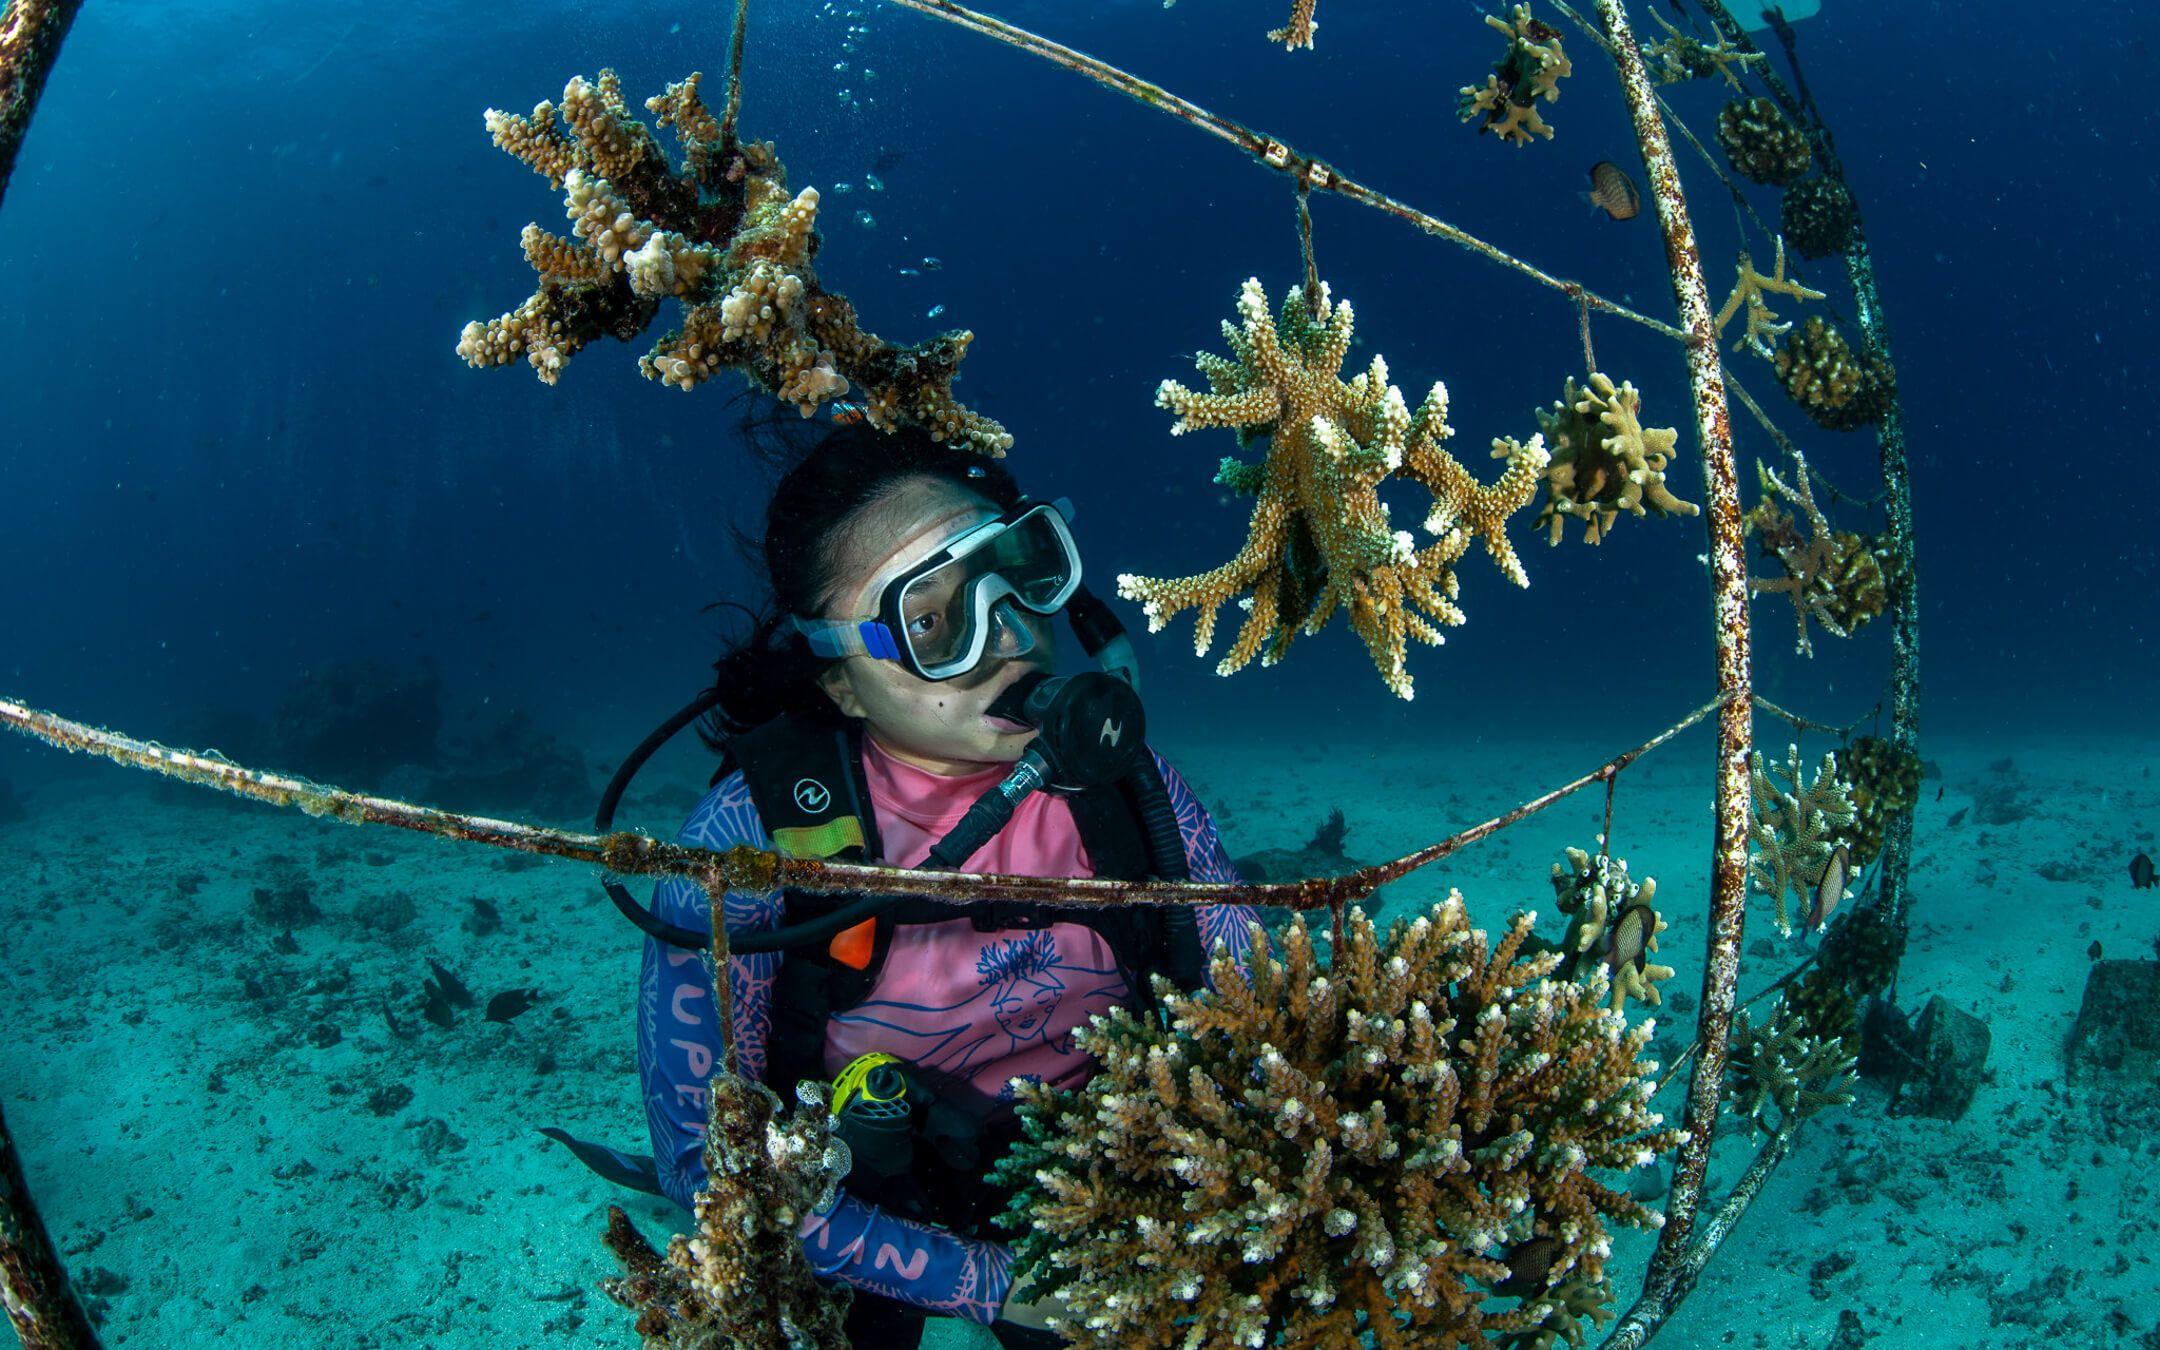 Coral Catch uses a variety of methods to grow corals, including rope, tree, and table structures, all designed to give corals the best chance of survival.
Photographer: Nicolas Hahn